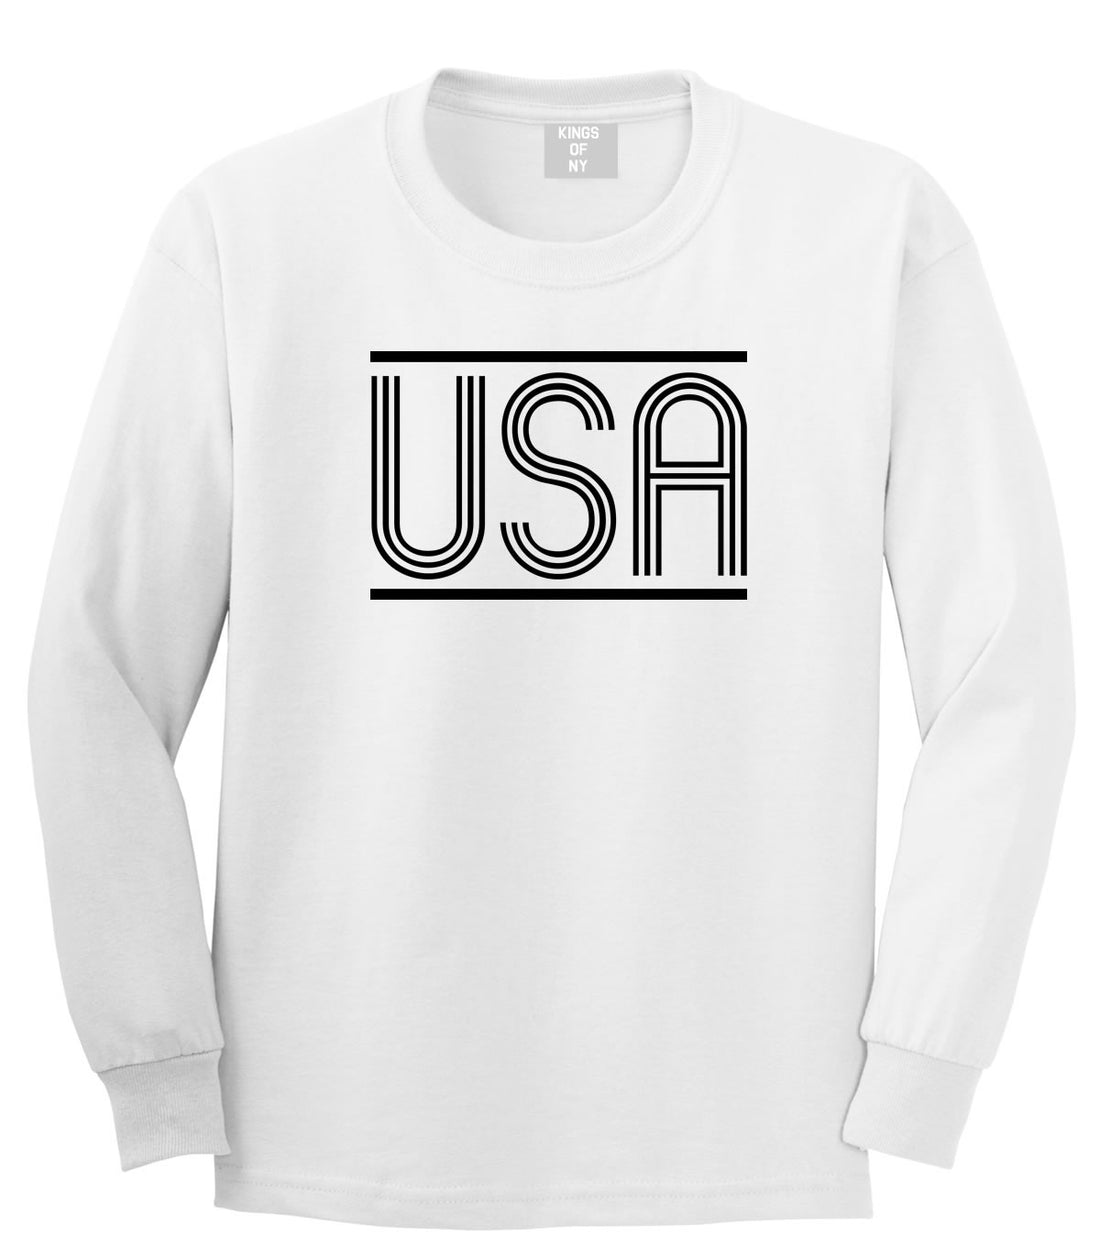 USA America Fall15 Long Sleeve T-Shirt in White by Kings Of NY